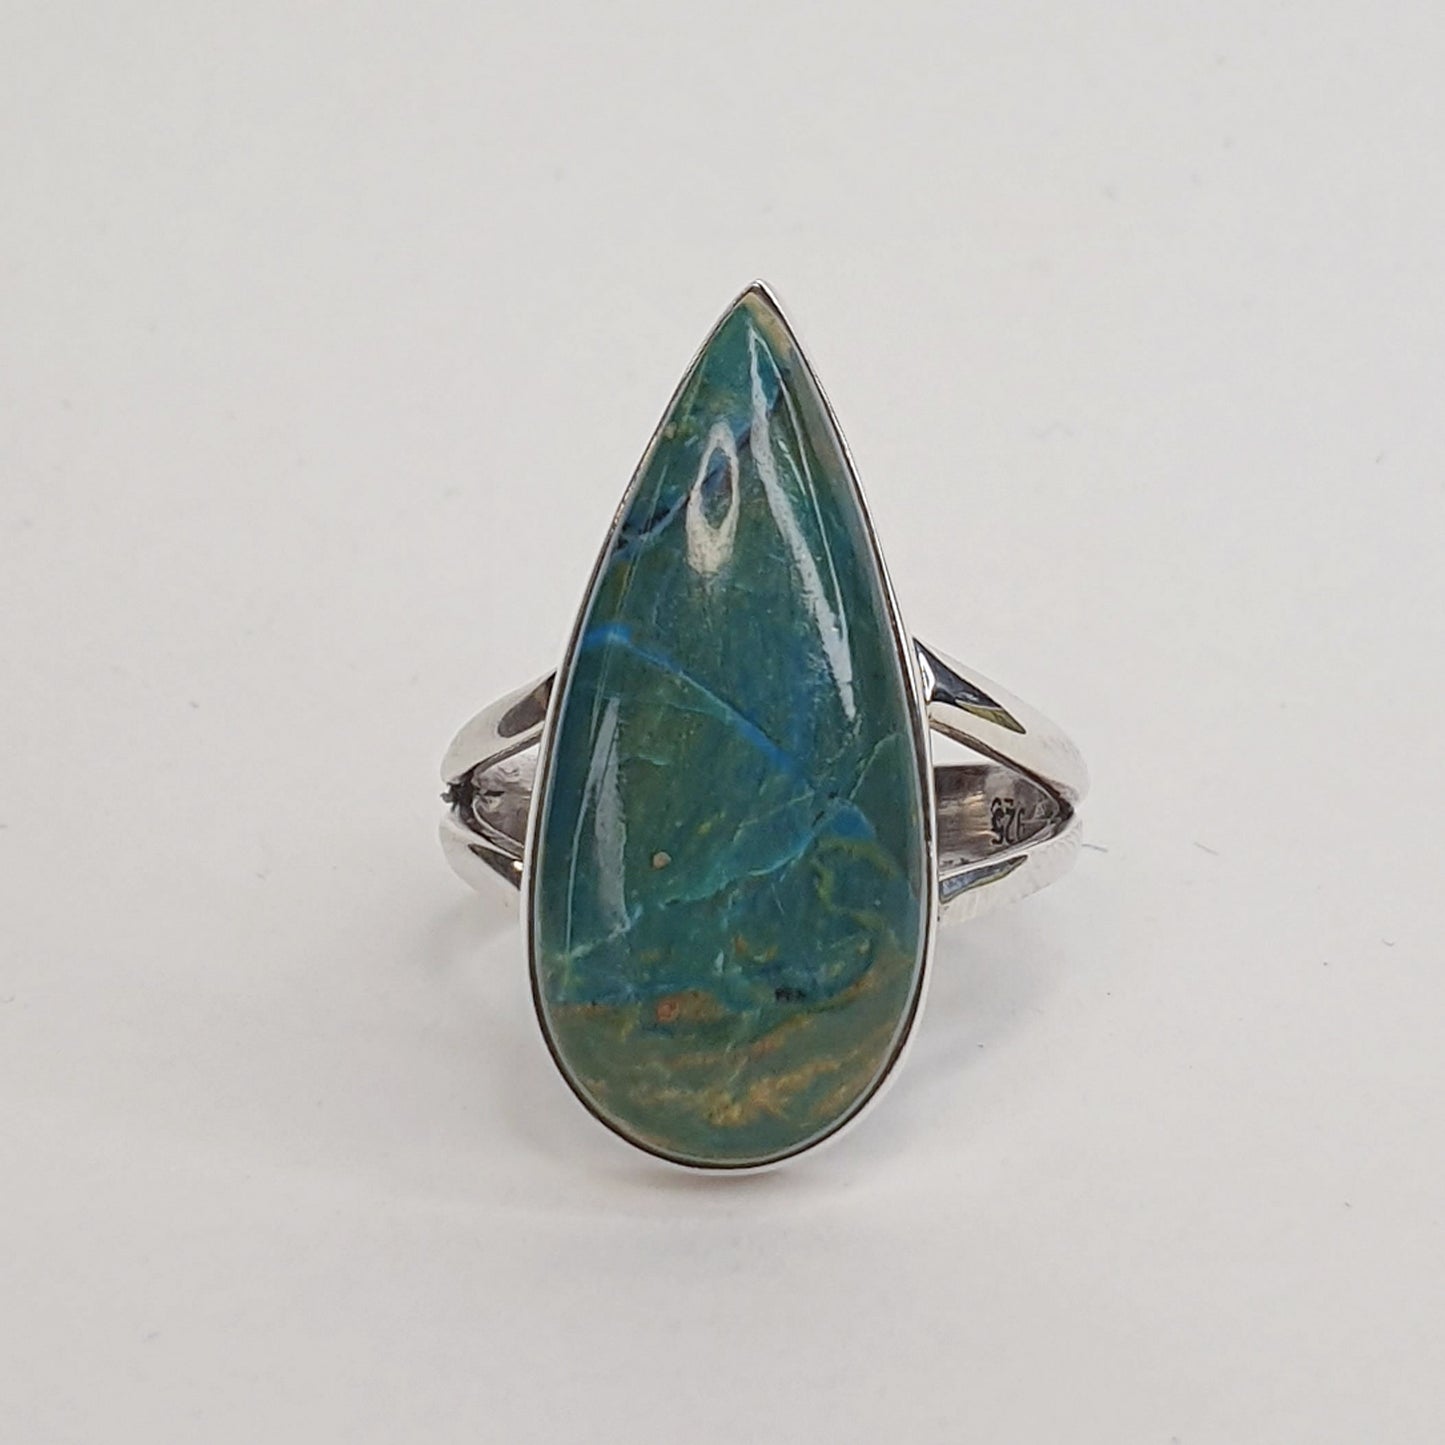 Chrysocolla Ring - Size 6.5 - ON SALE